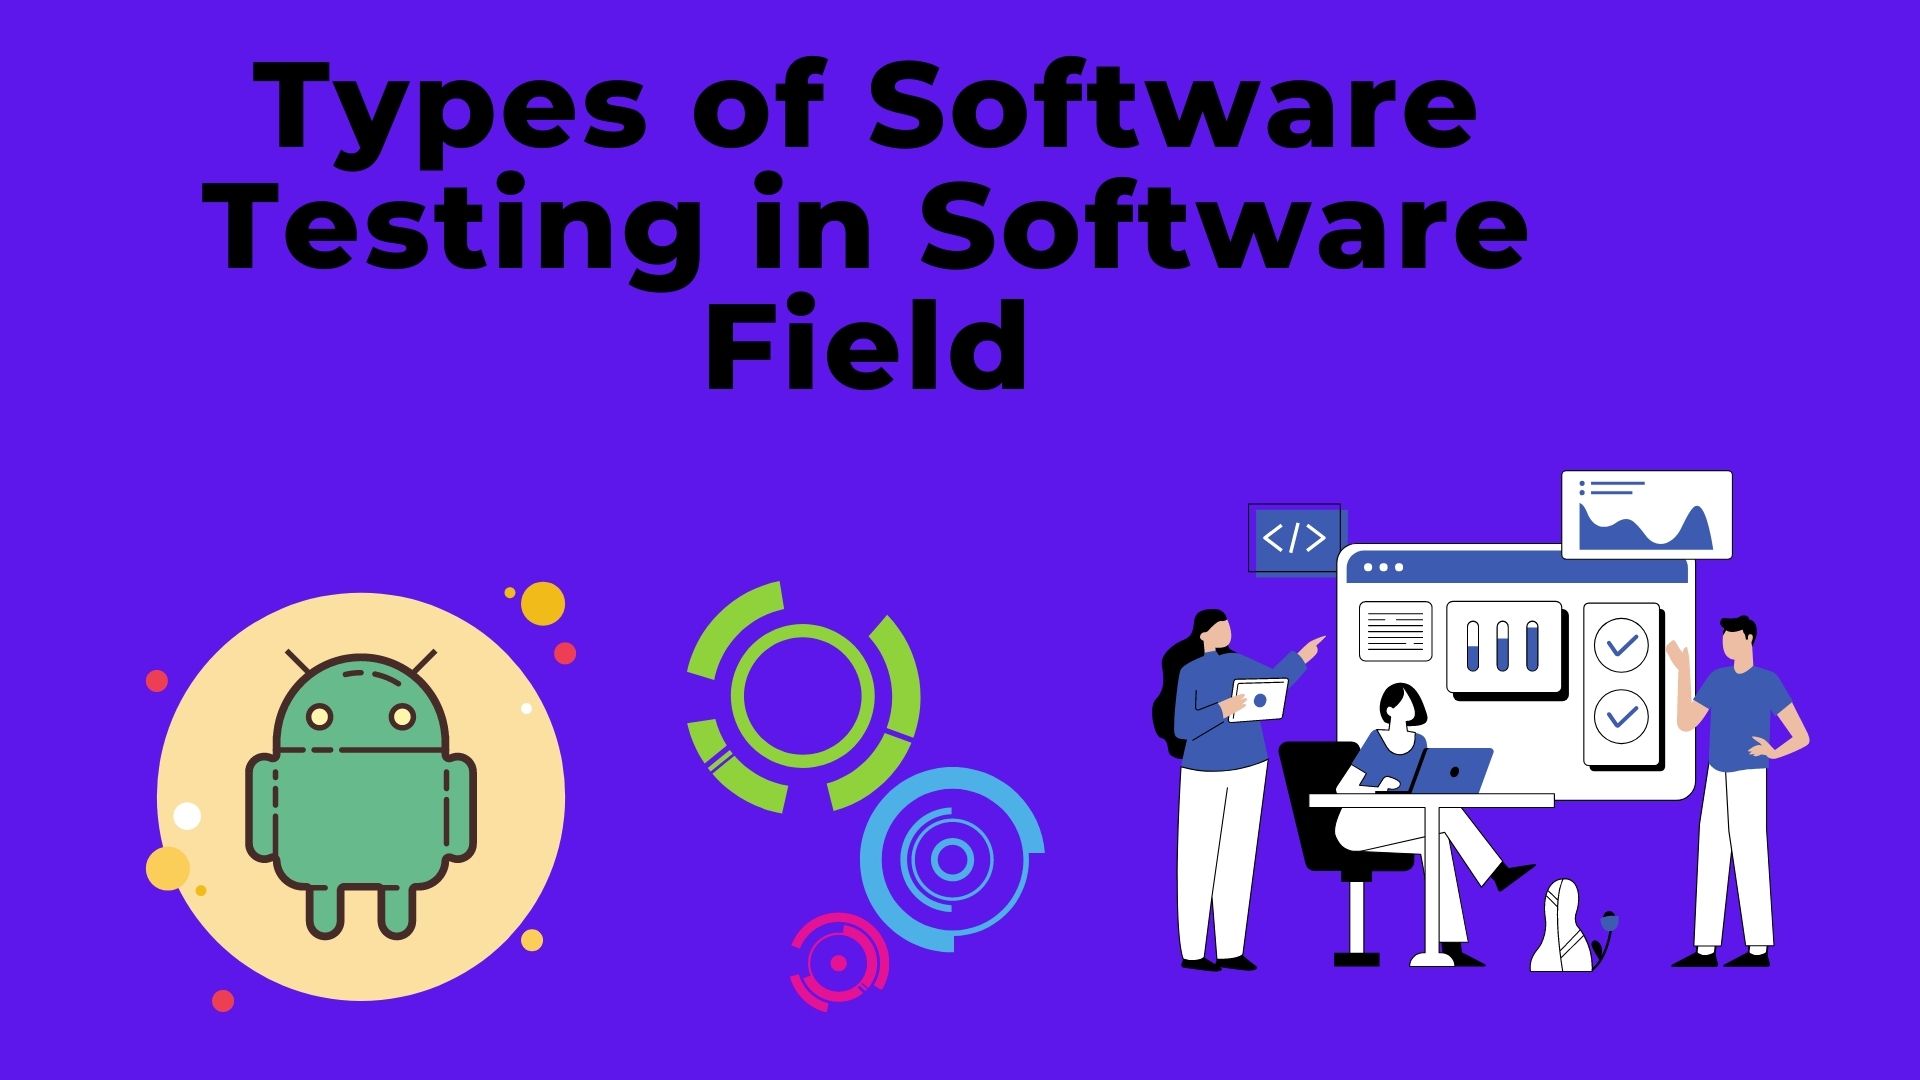 Types of Software Testing in Software Field